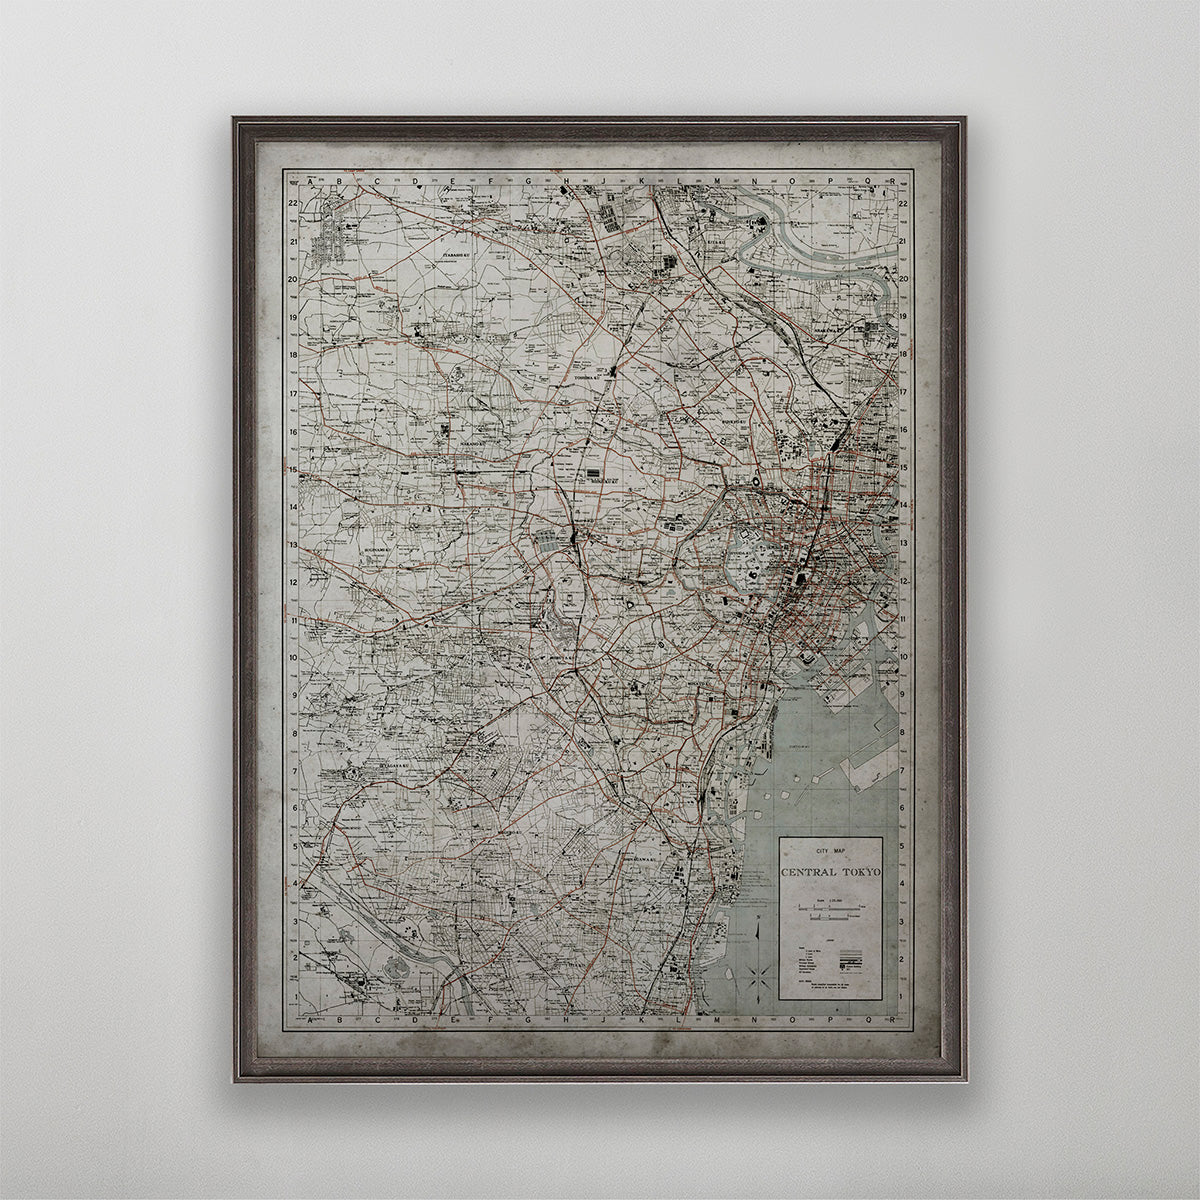 Old vintage historic map of Tokyo for wall art home decor. 